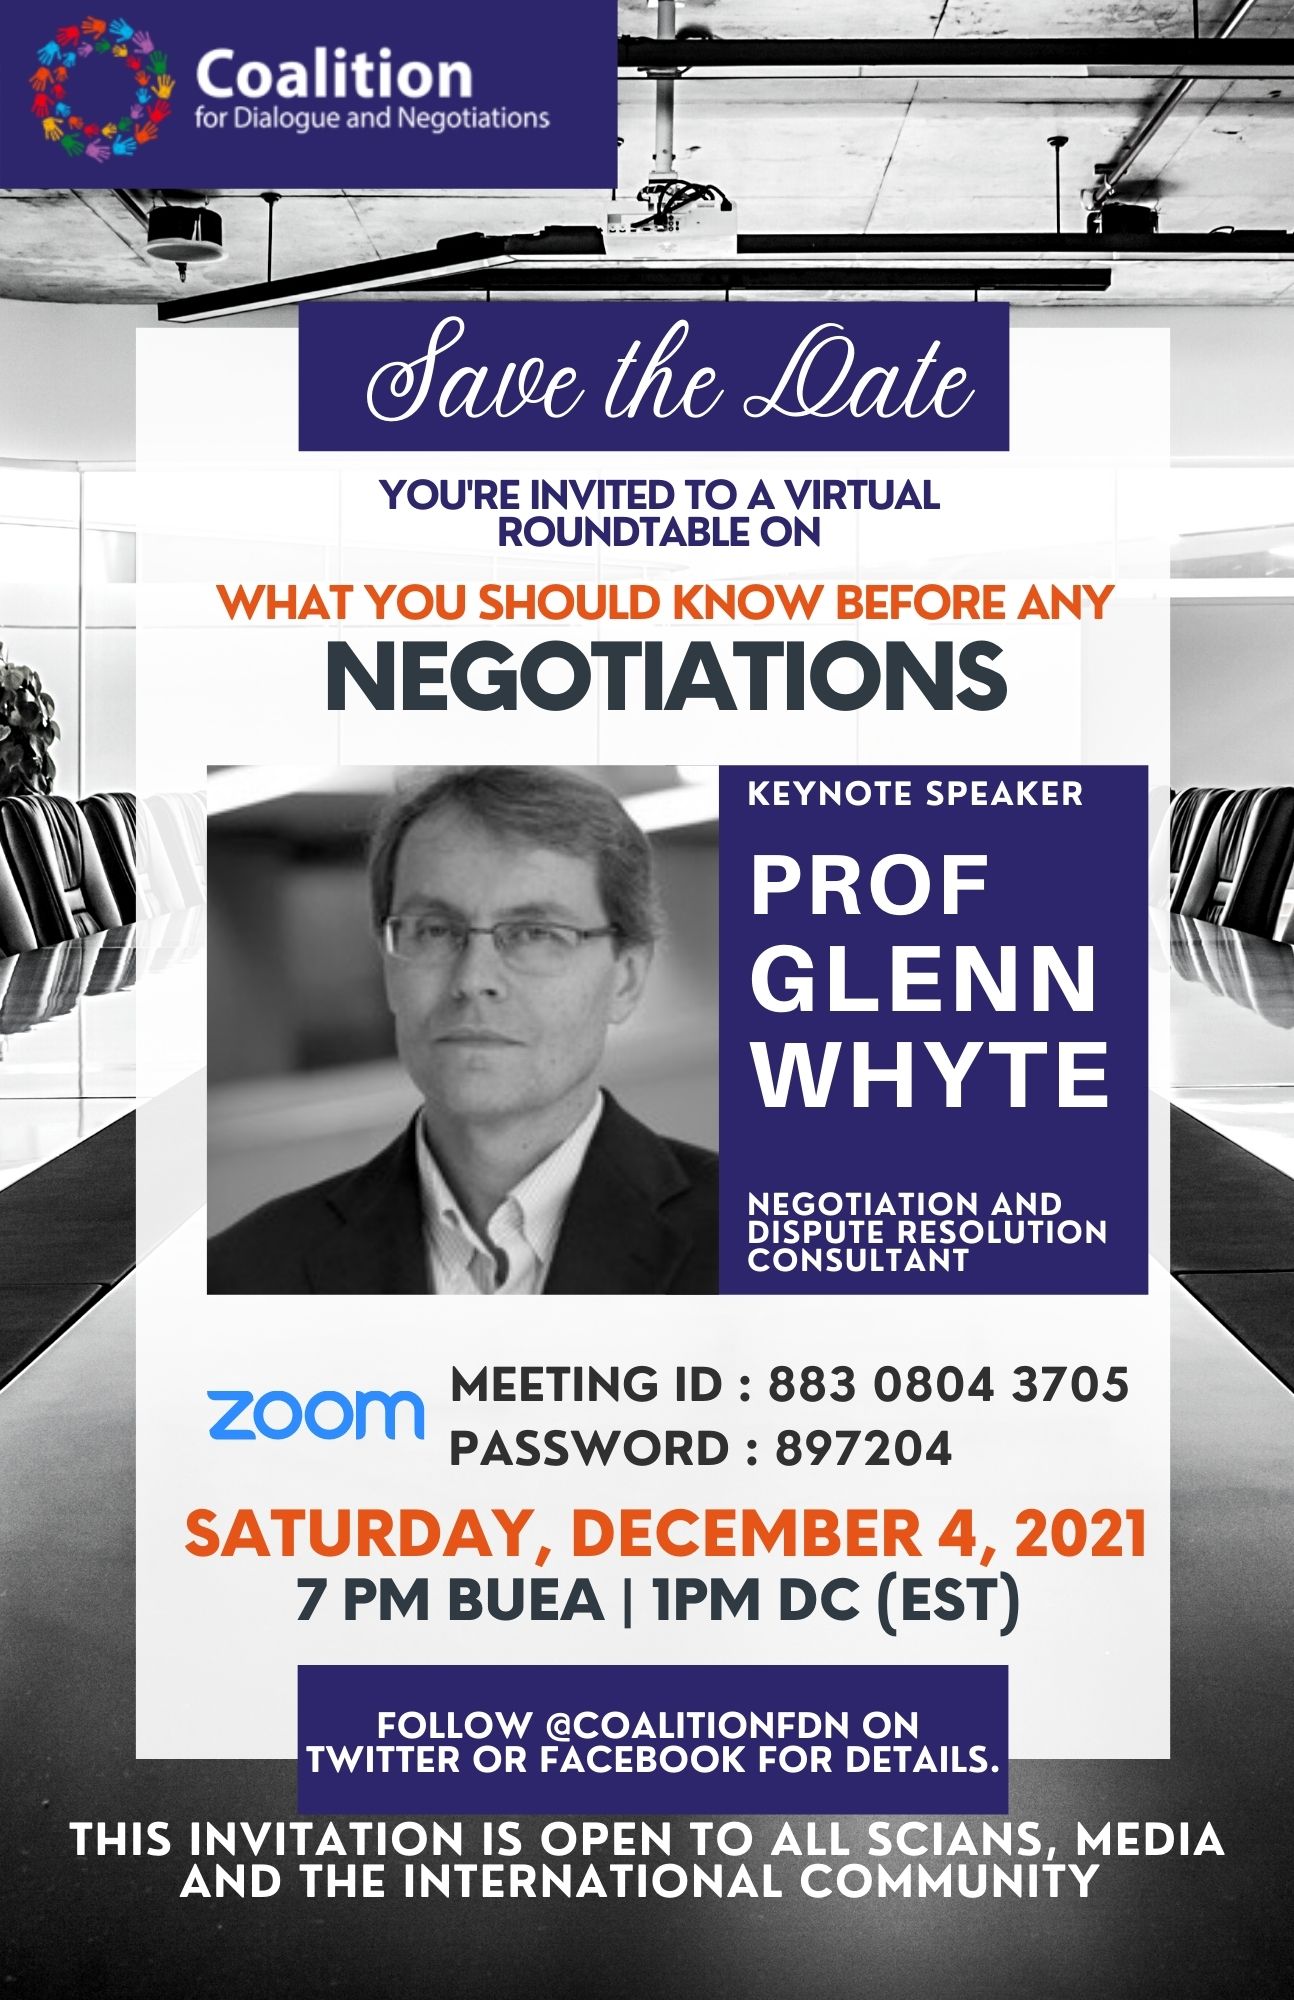 December 4, 2021 – Roundtable on Negotiations